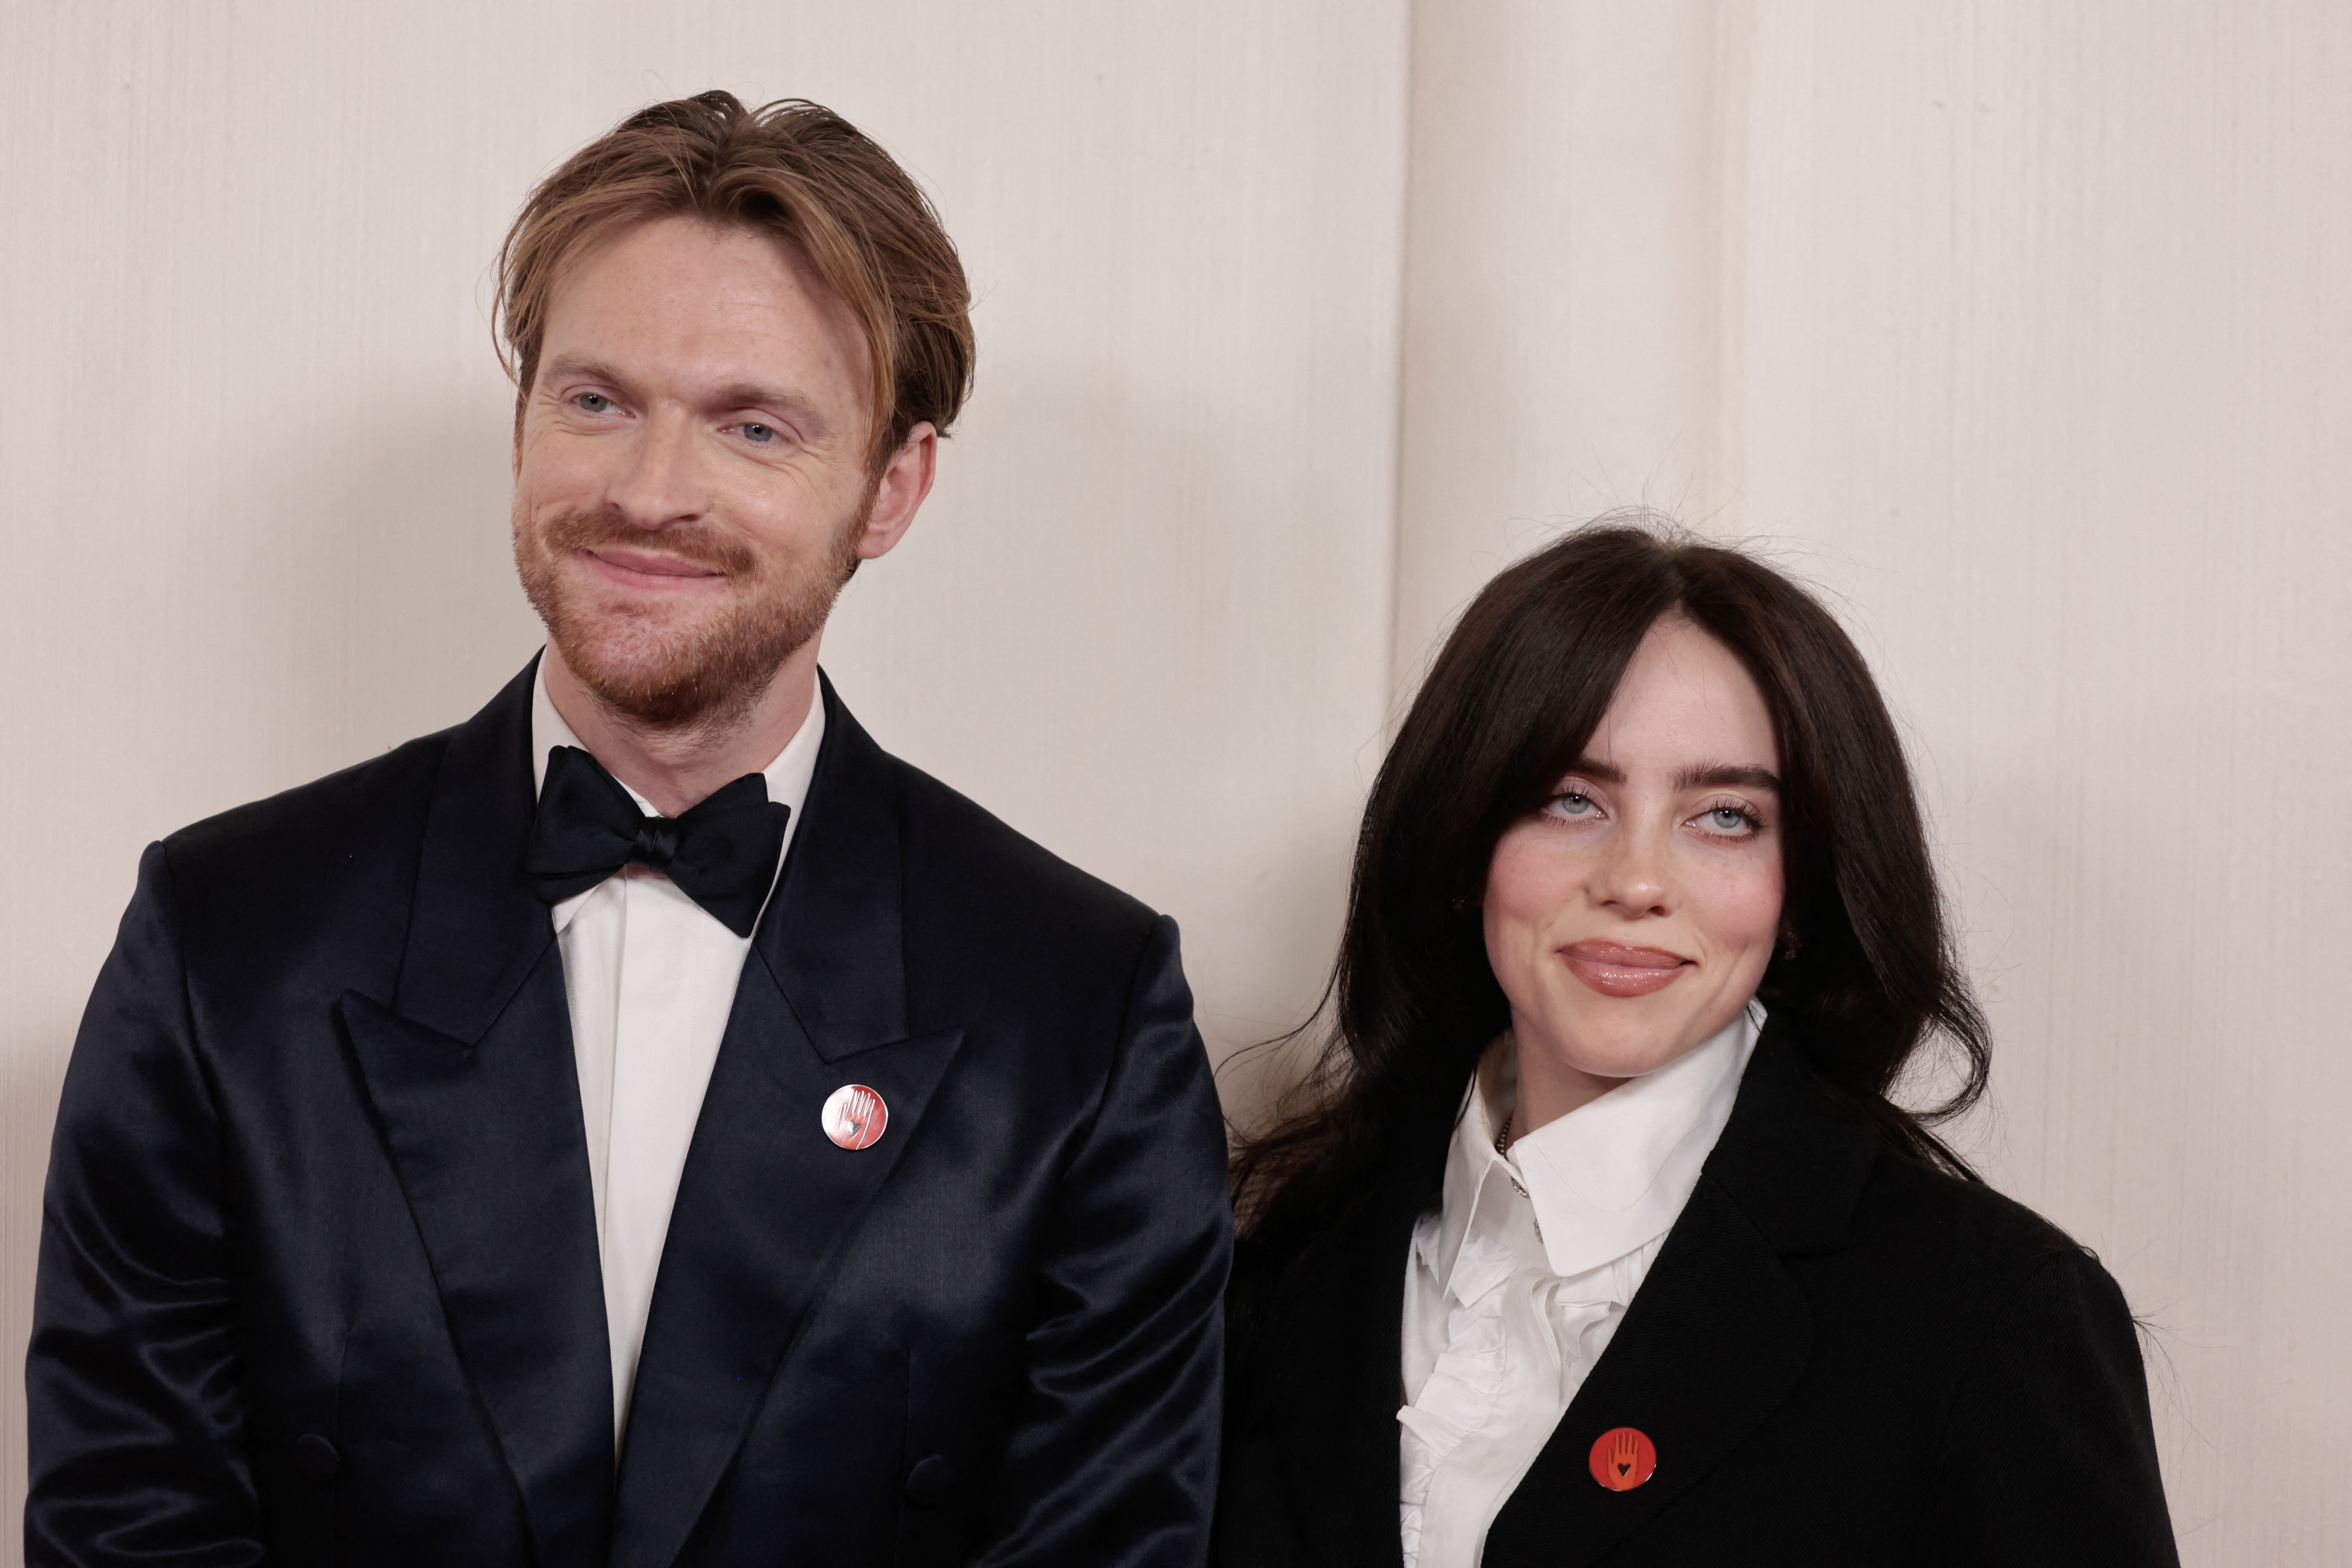 Finneas and Billie Eilish standing side by side, one in a black tuxedo and the other in a black and white suit, both wearing red lapel pins